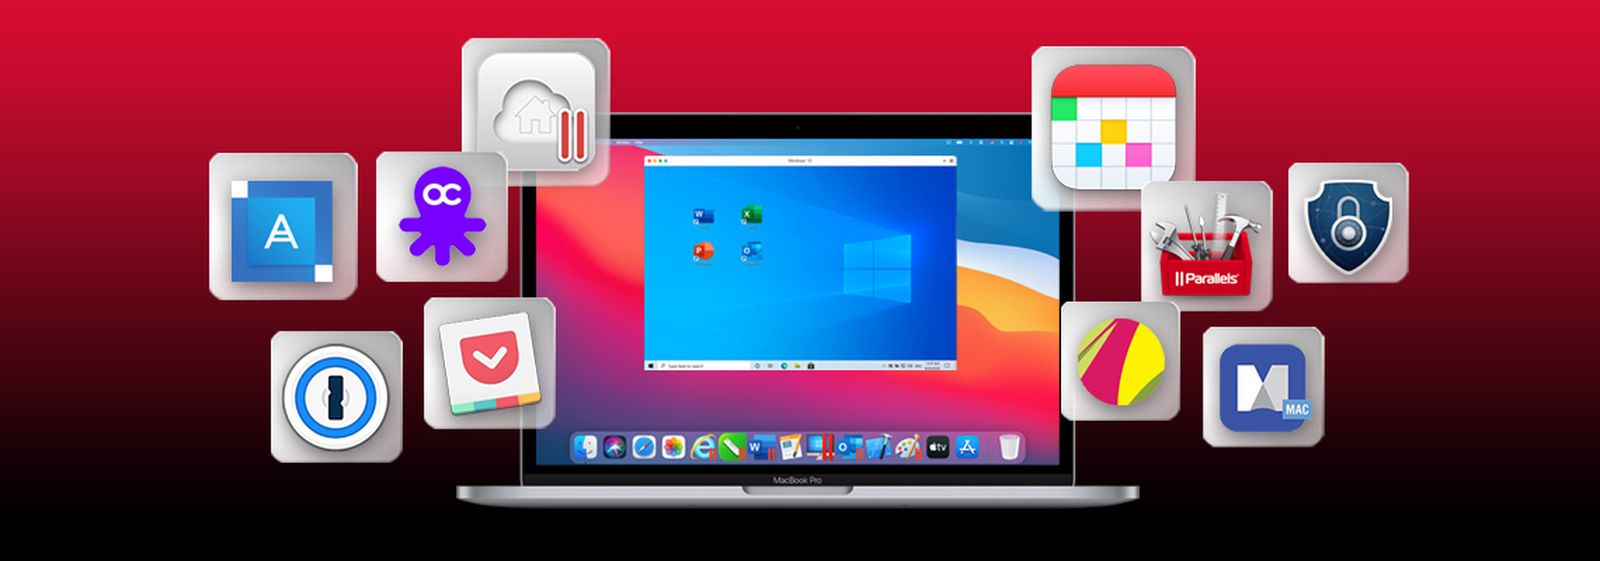 parallels desktop® 14 for mac upgrade deal get a free $10 amazon gift card